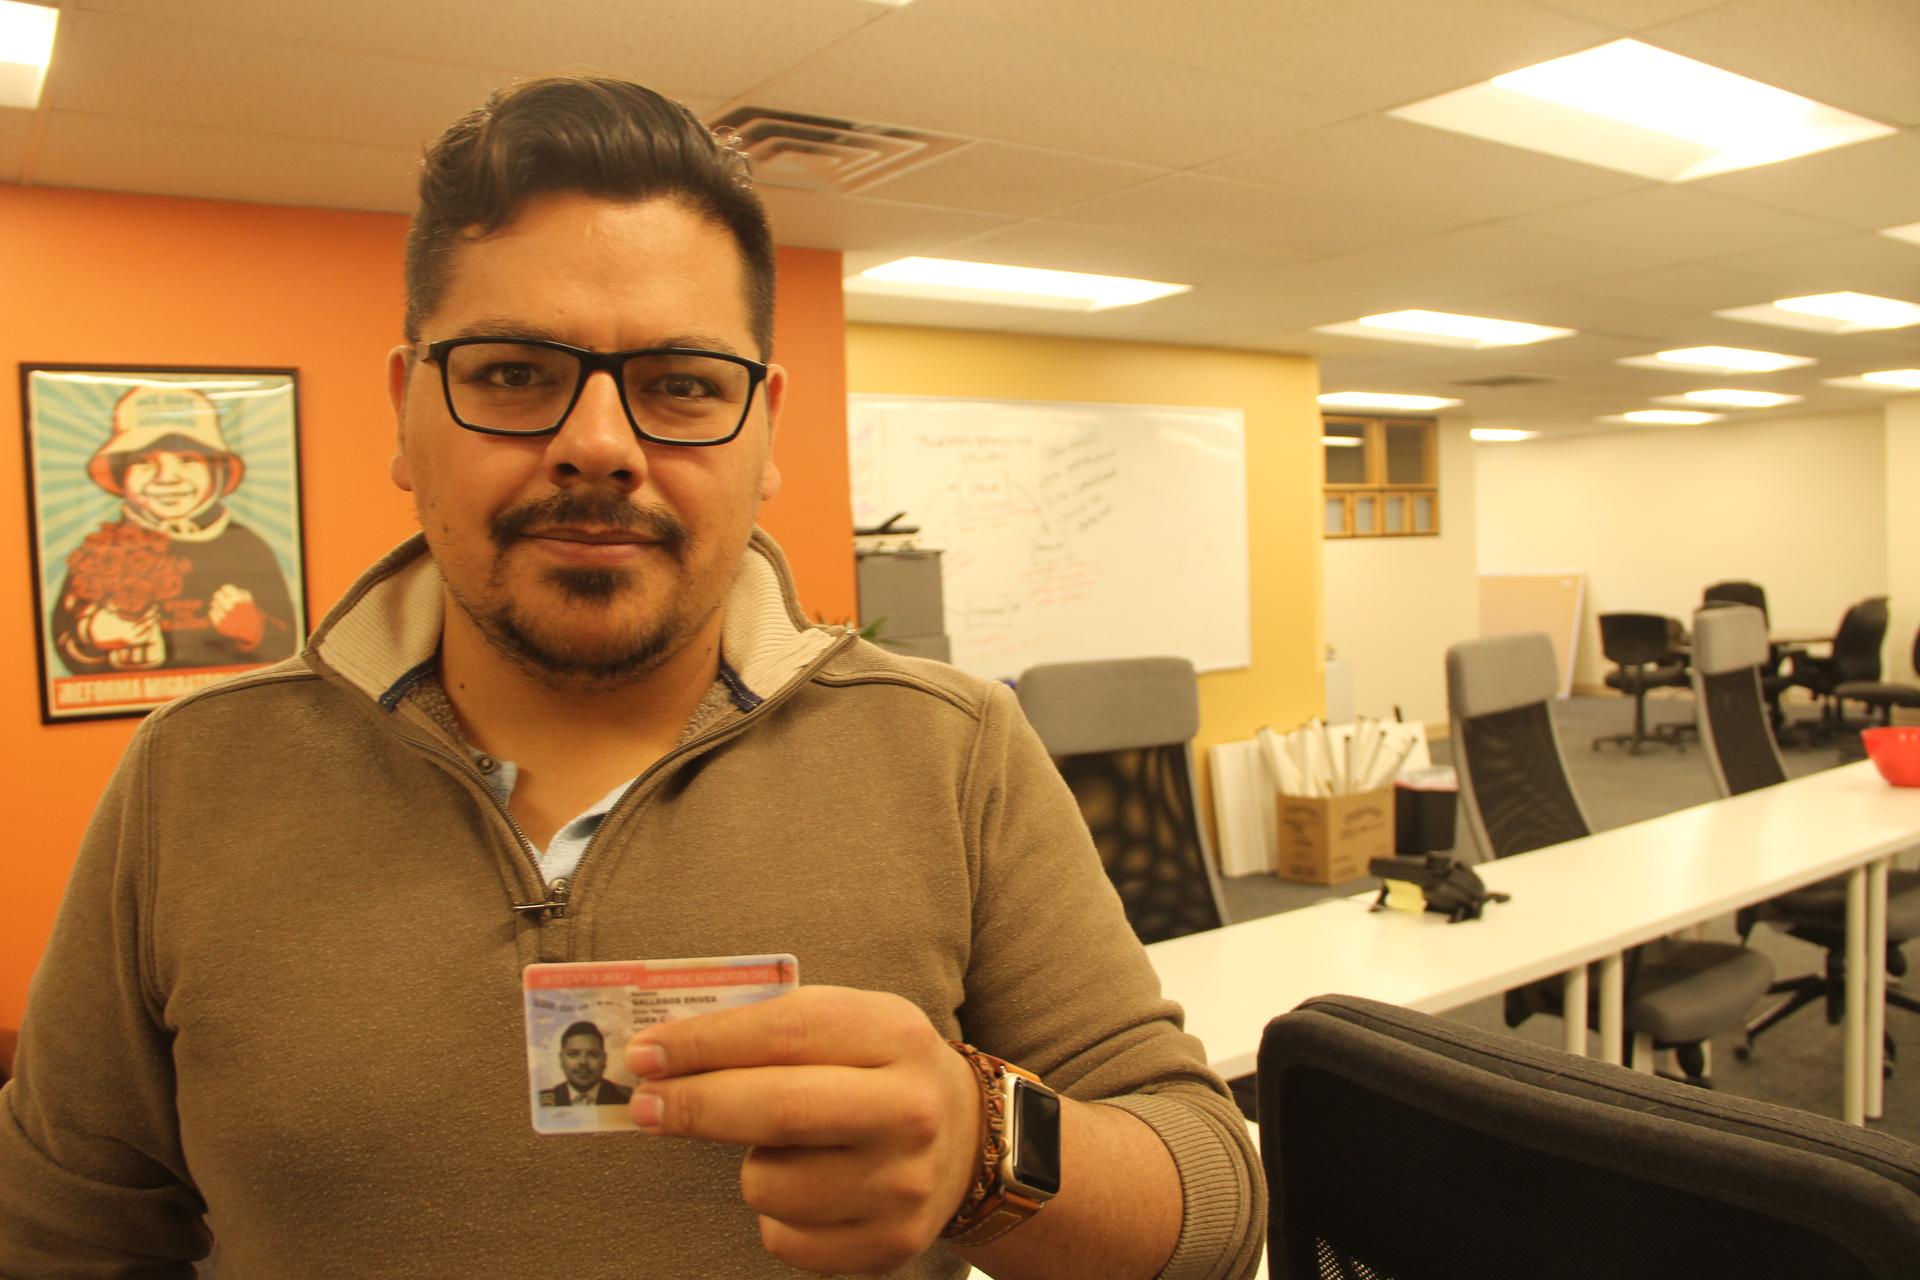 Juan Gallegos holds his US employment authorization card issued to DACA recipients. His legal status, and ability to work legally in the US, ends August 28, 2019.